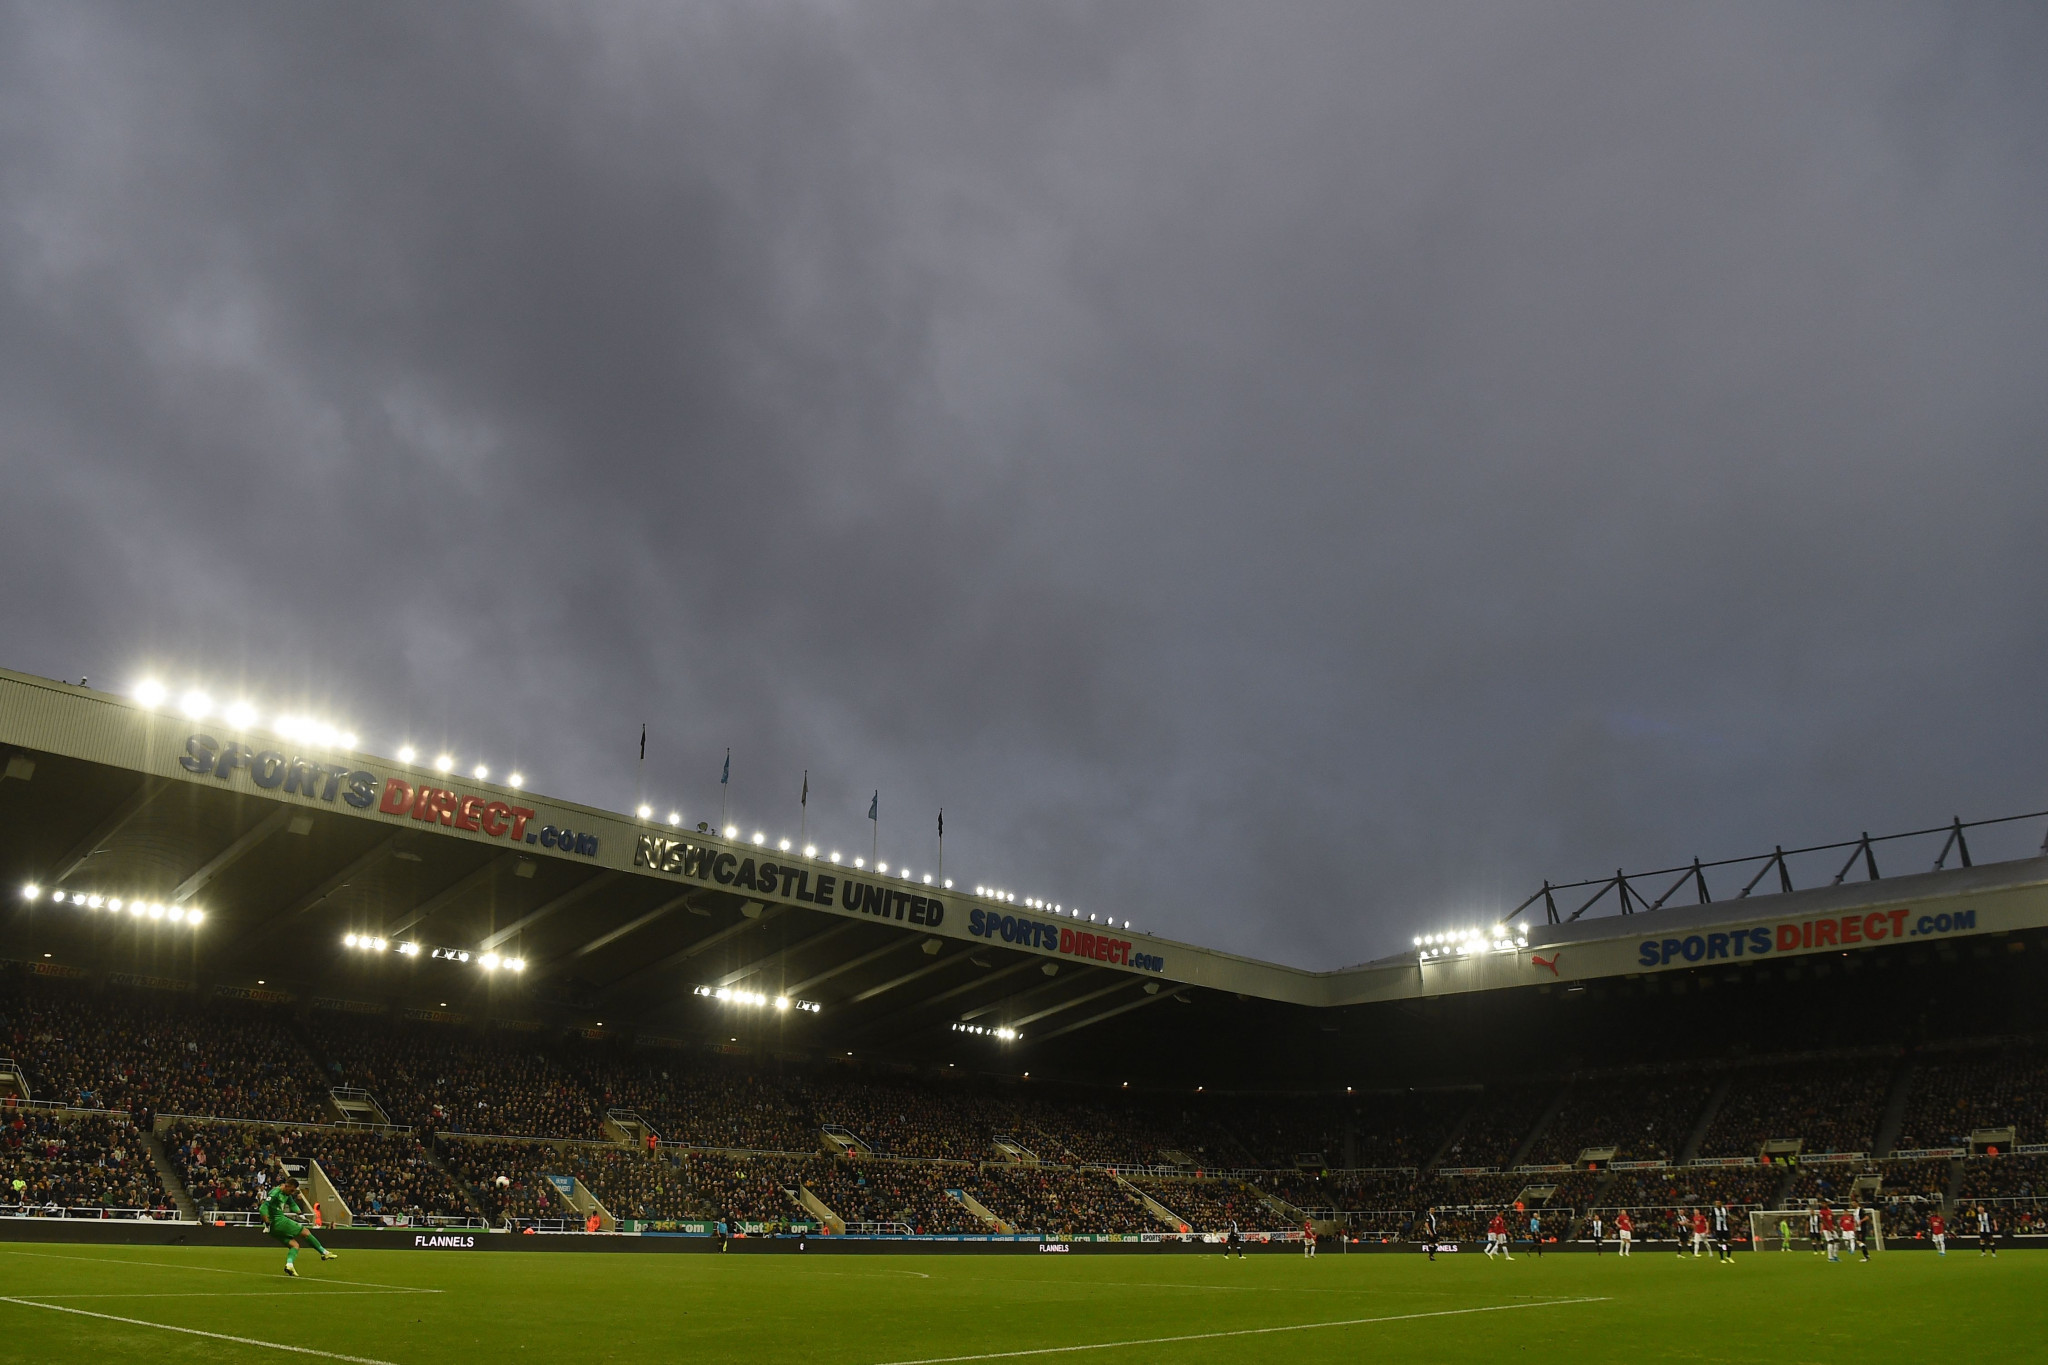 St James' Park in Newcastle, home of Newcastle United Football Club, will host the opening match of the 2021 Rugby League World Cup ©Getty Images